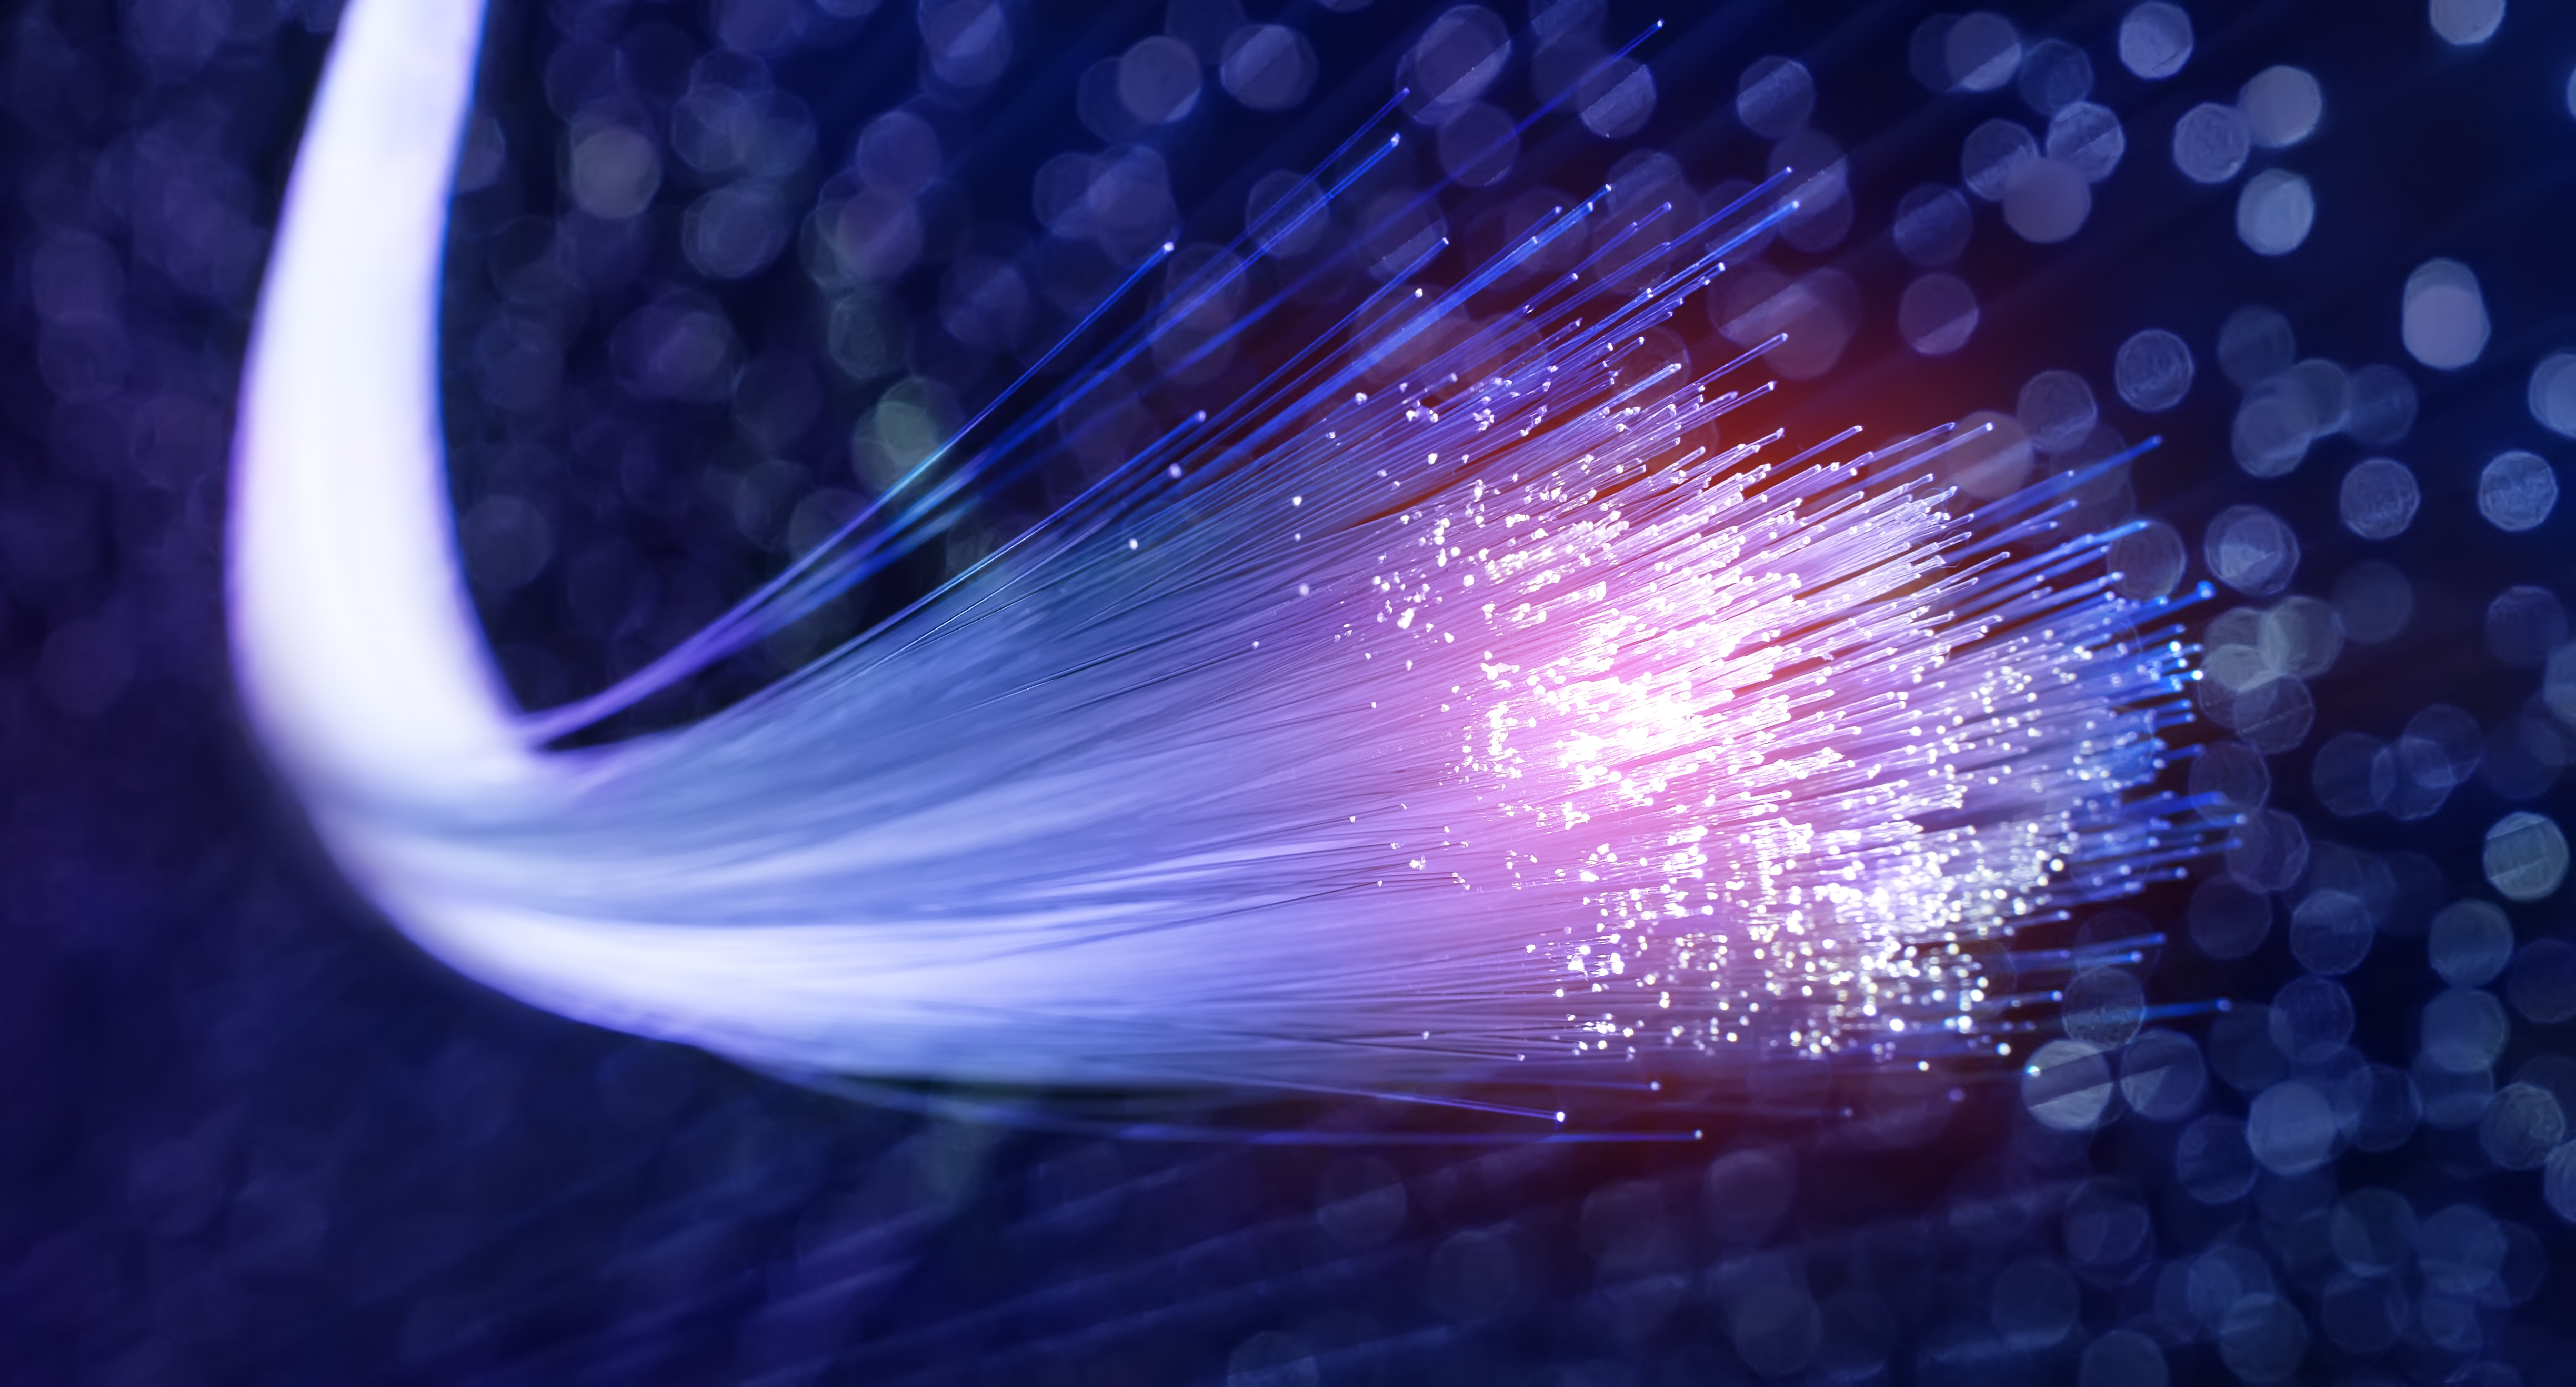 Millions of Londoners are missing out on full fibre broadband